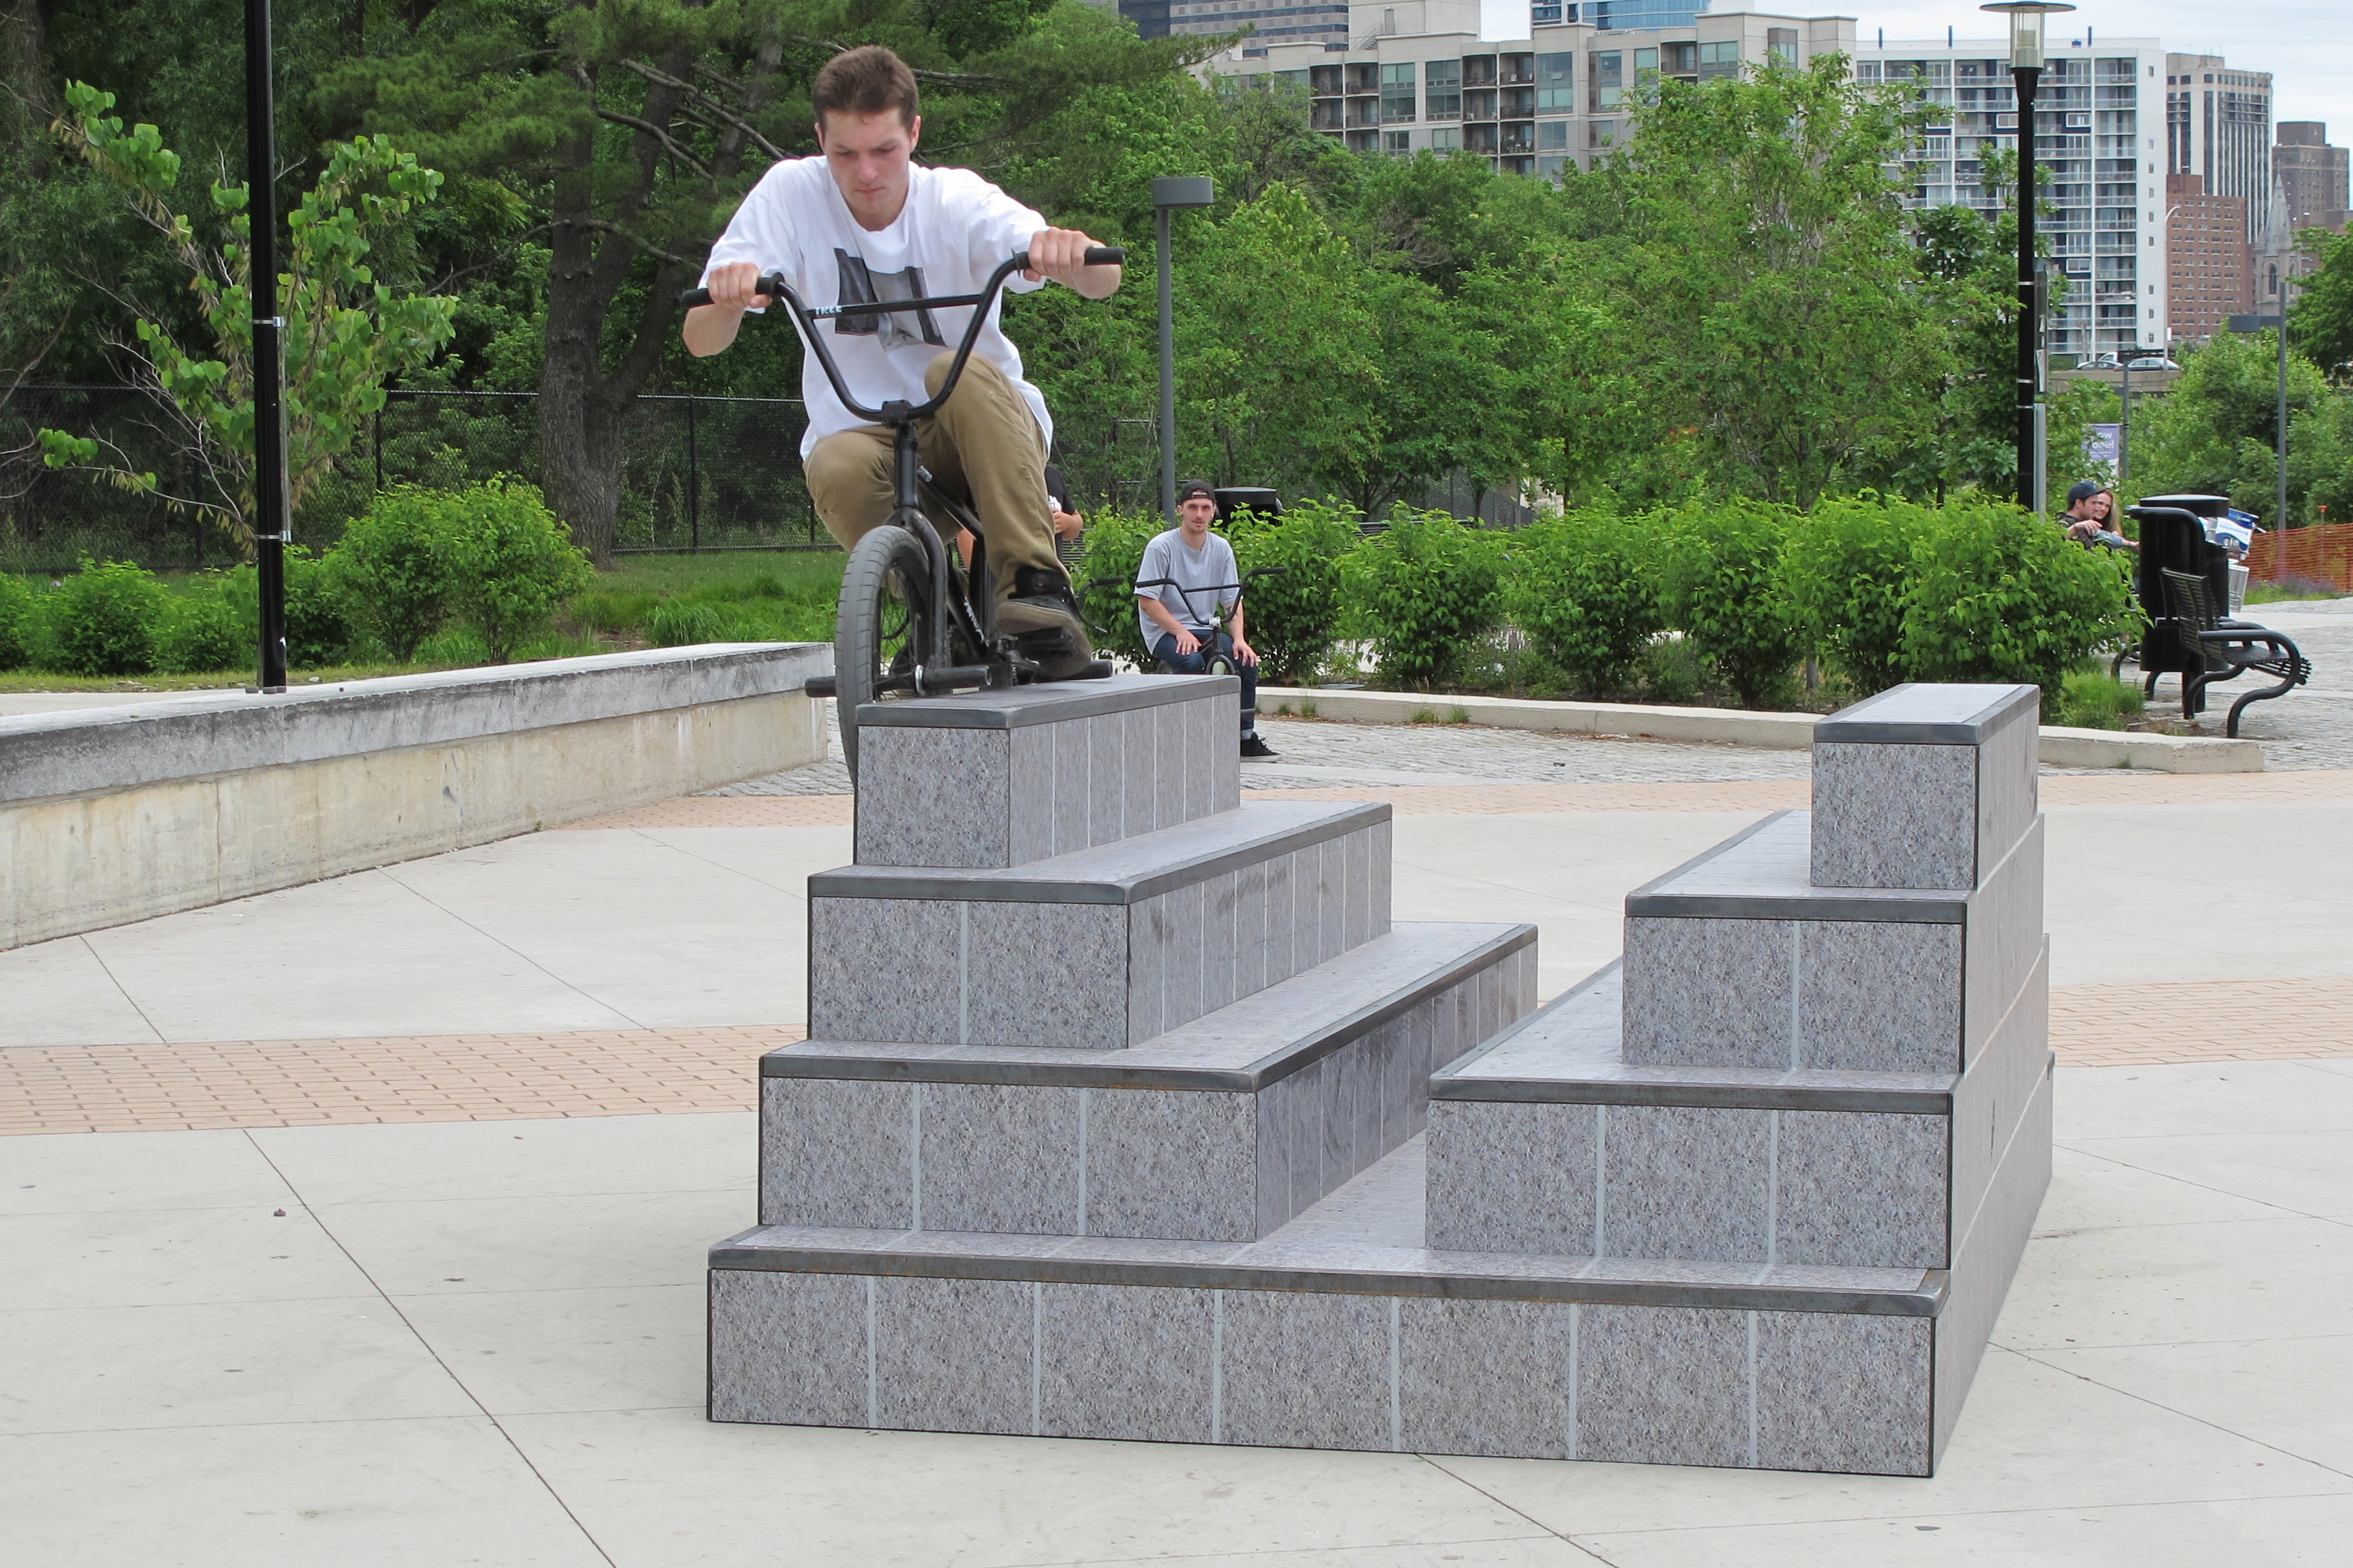 'Steps' might be more inviting for BMX riders | Ashley Hahn, PlanPhilly